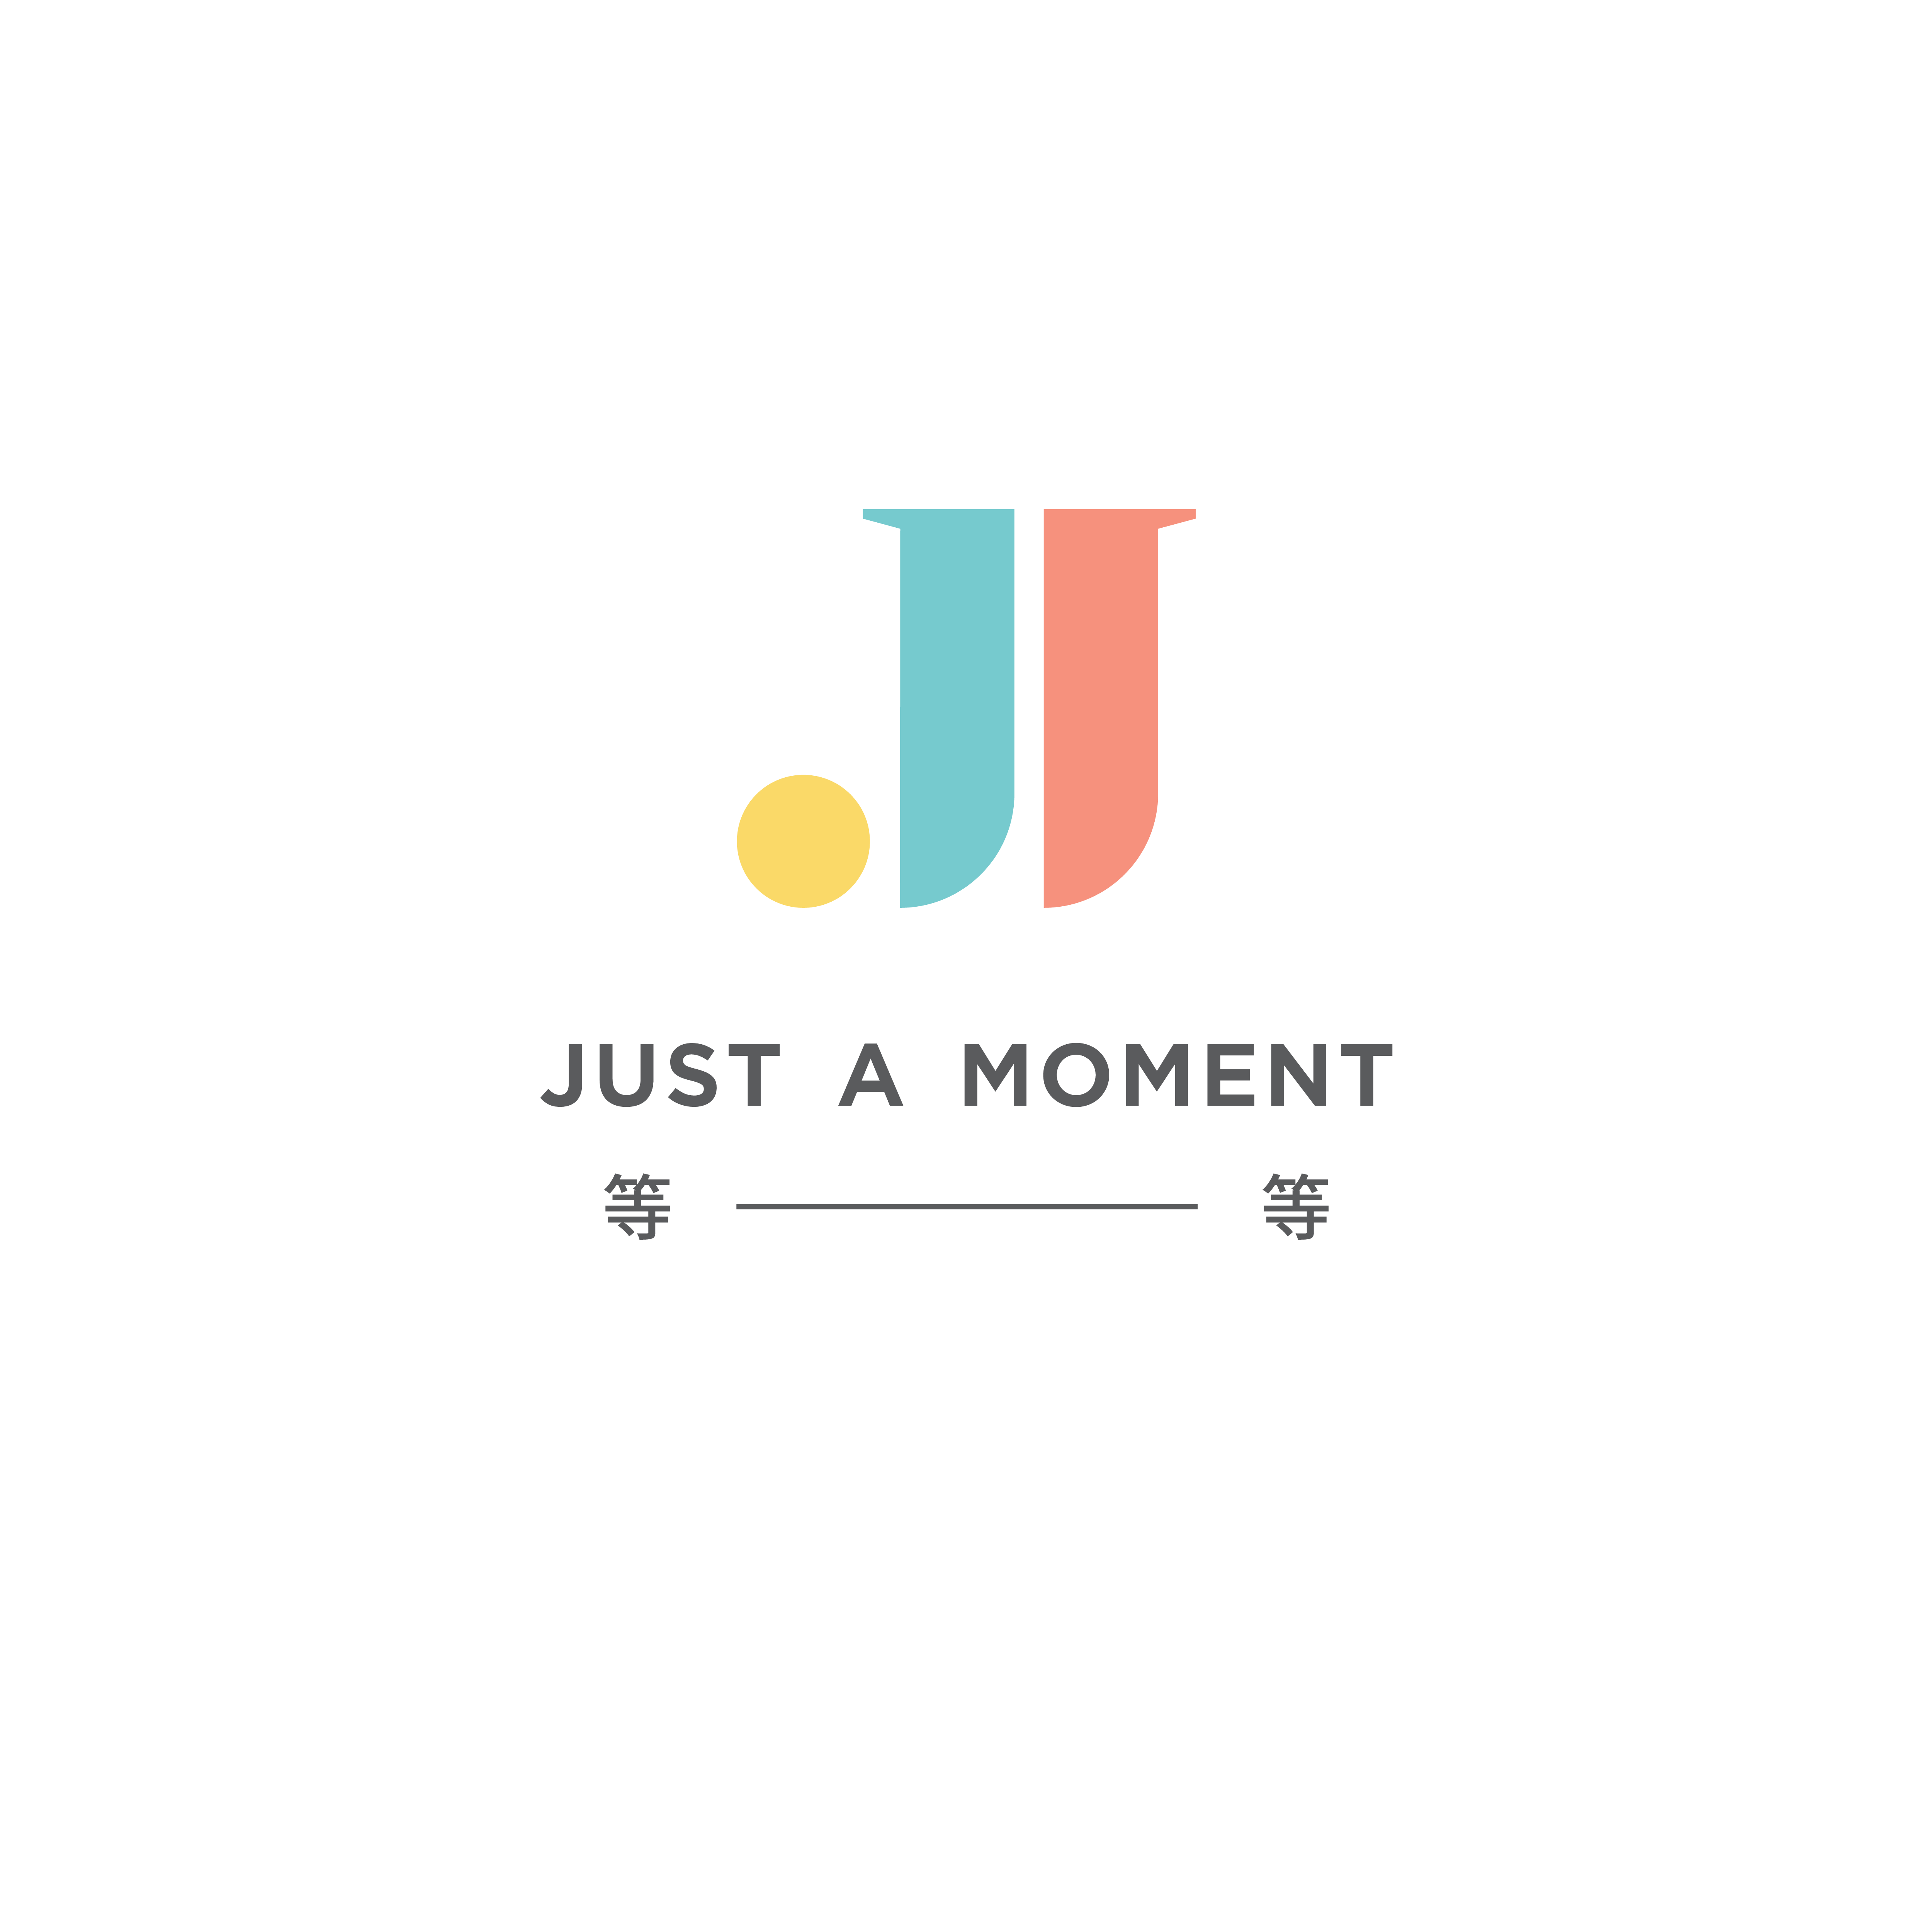 Just A Moment 等一等